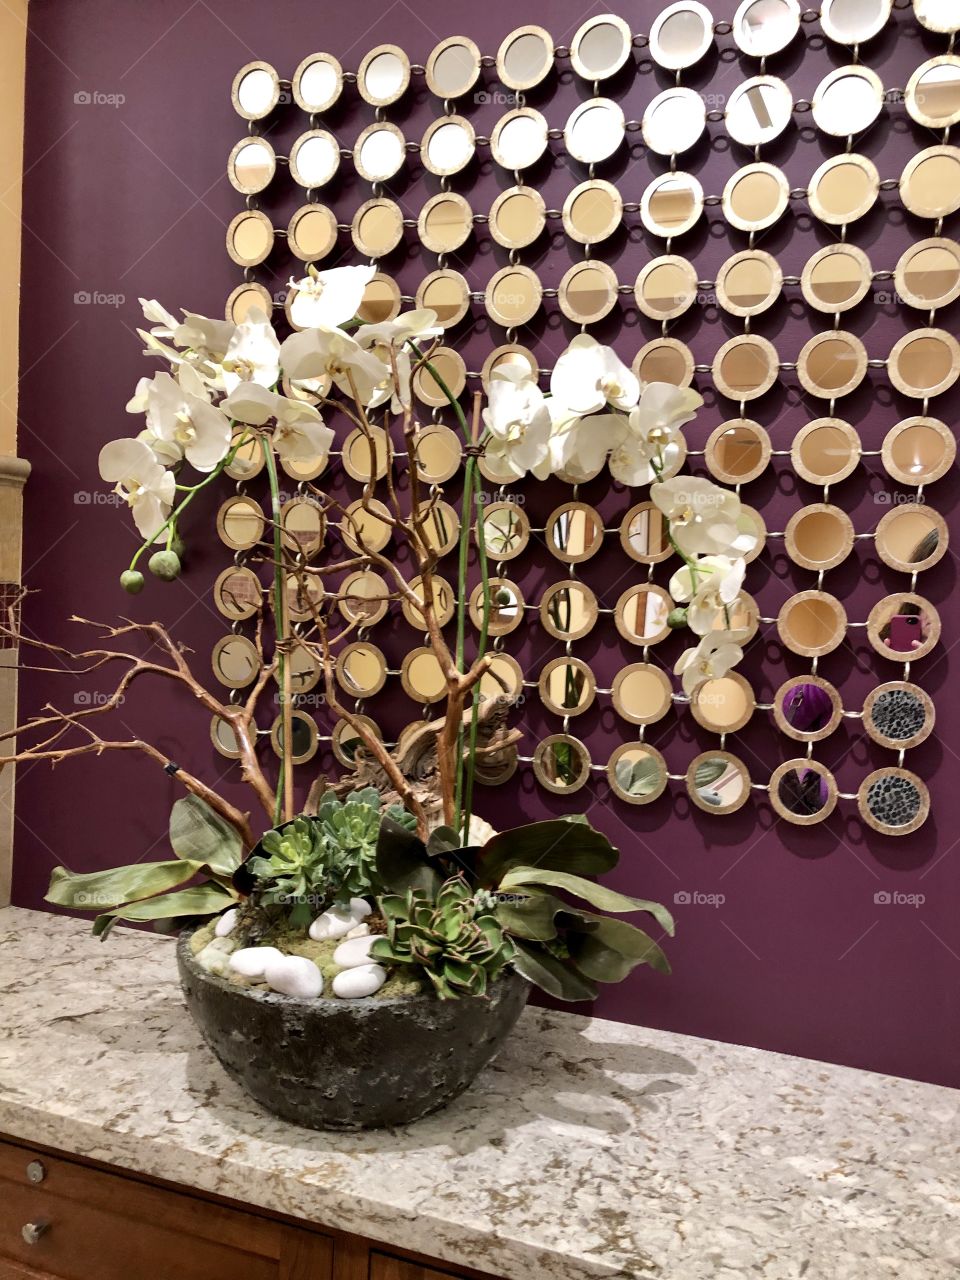 Potted orchids in front of plum wall with mirrored circles.